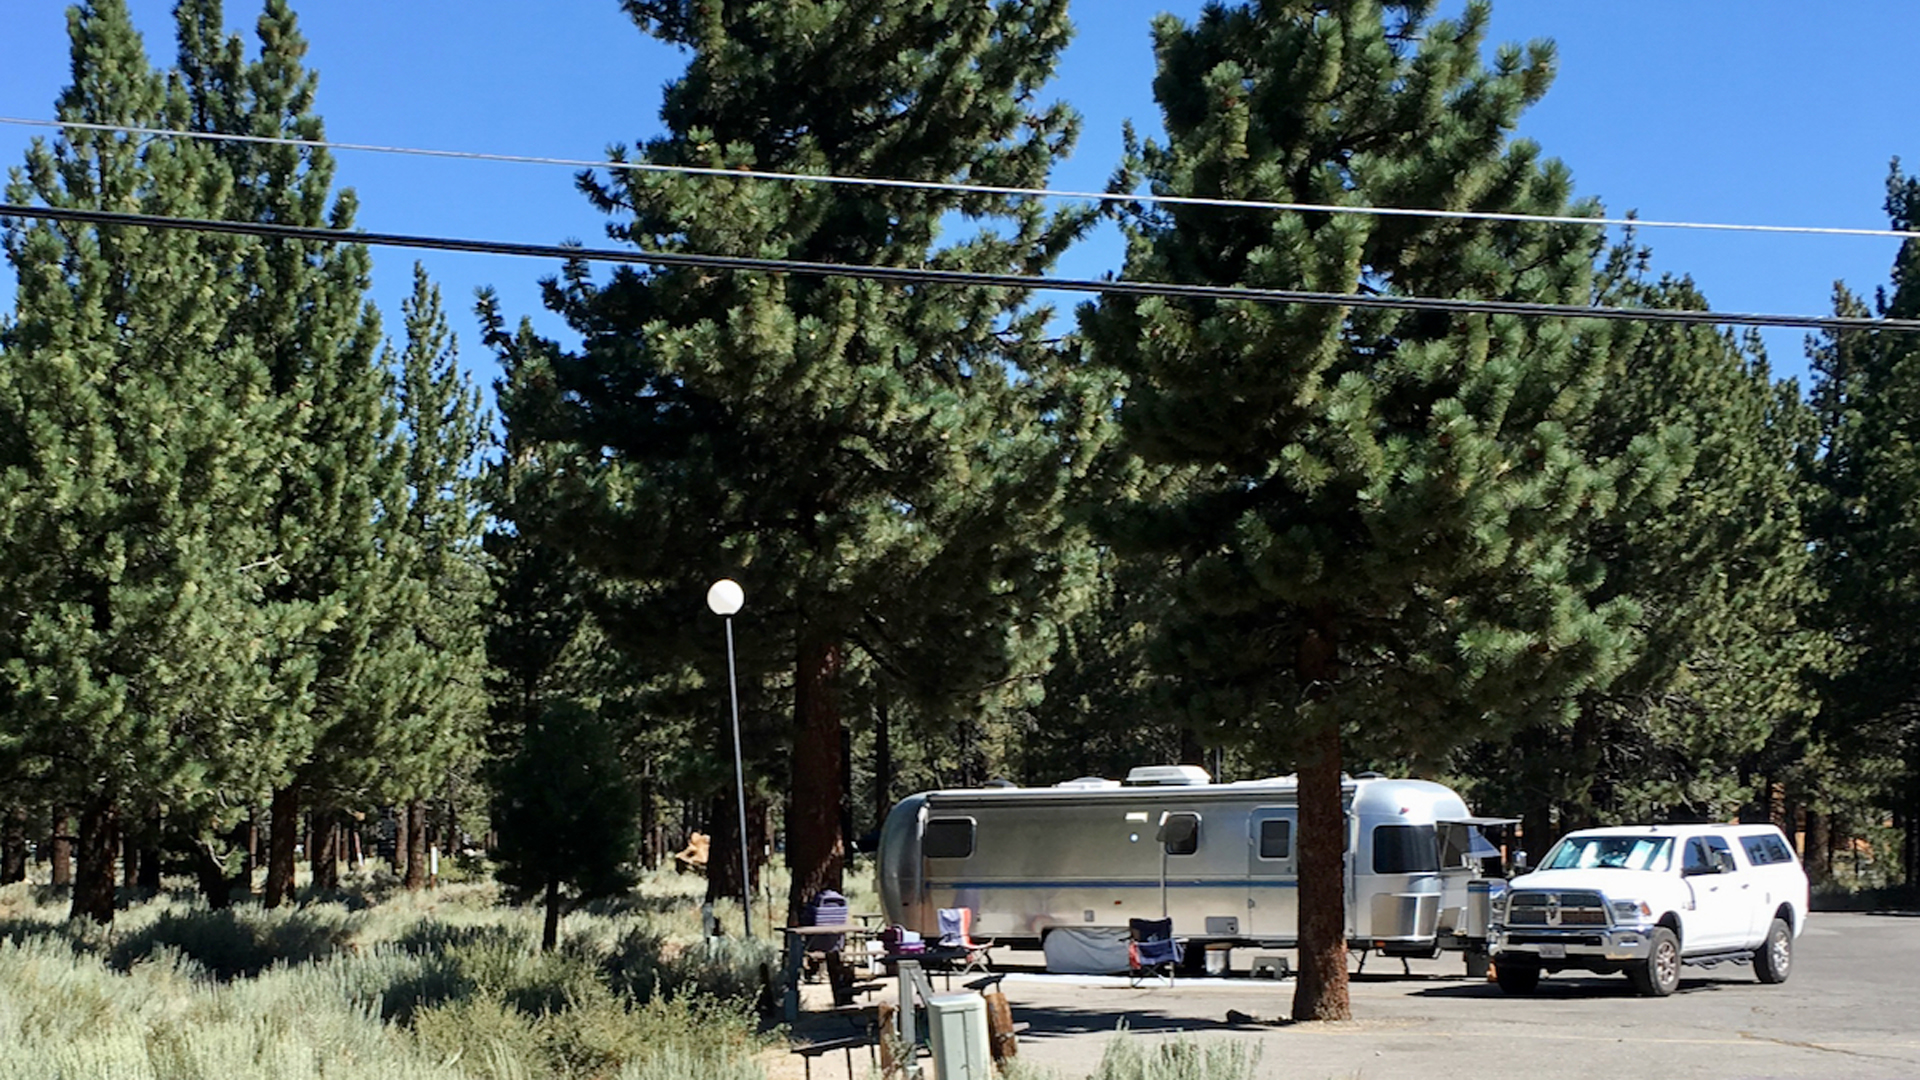 Airstream travel trailer parked at campground